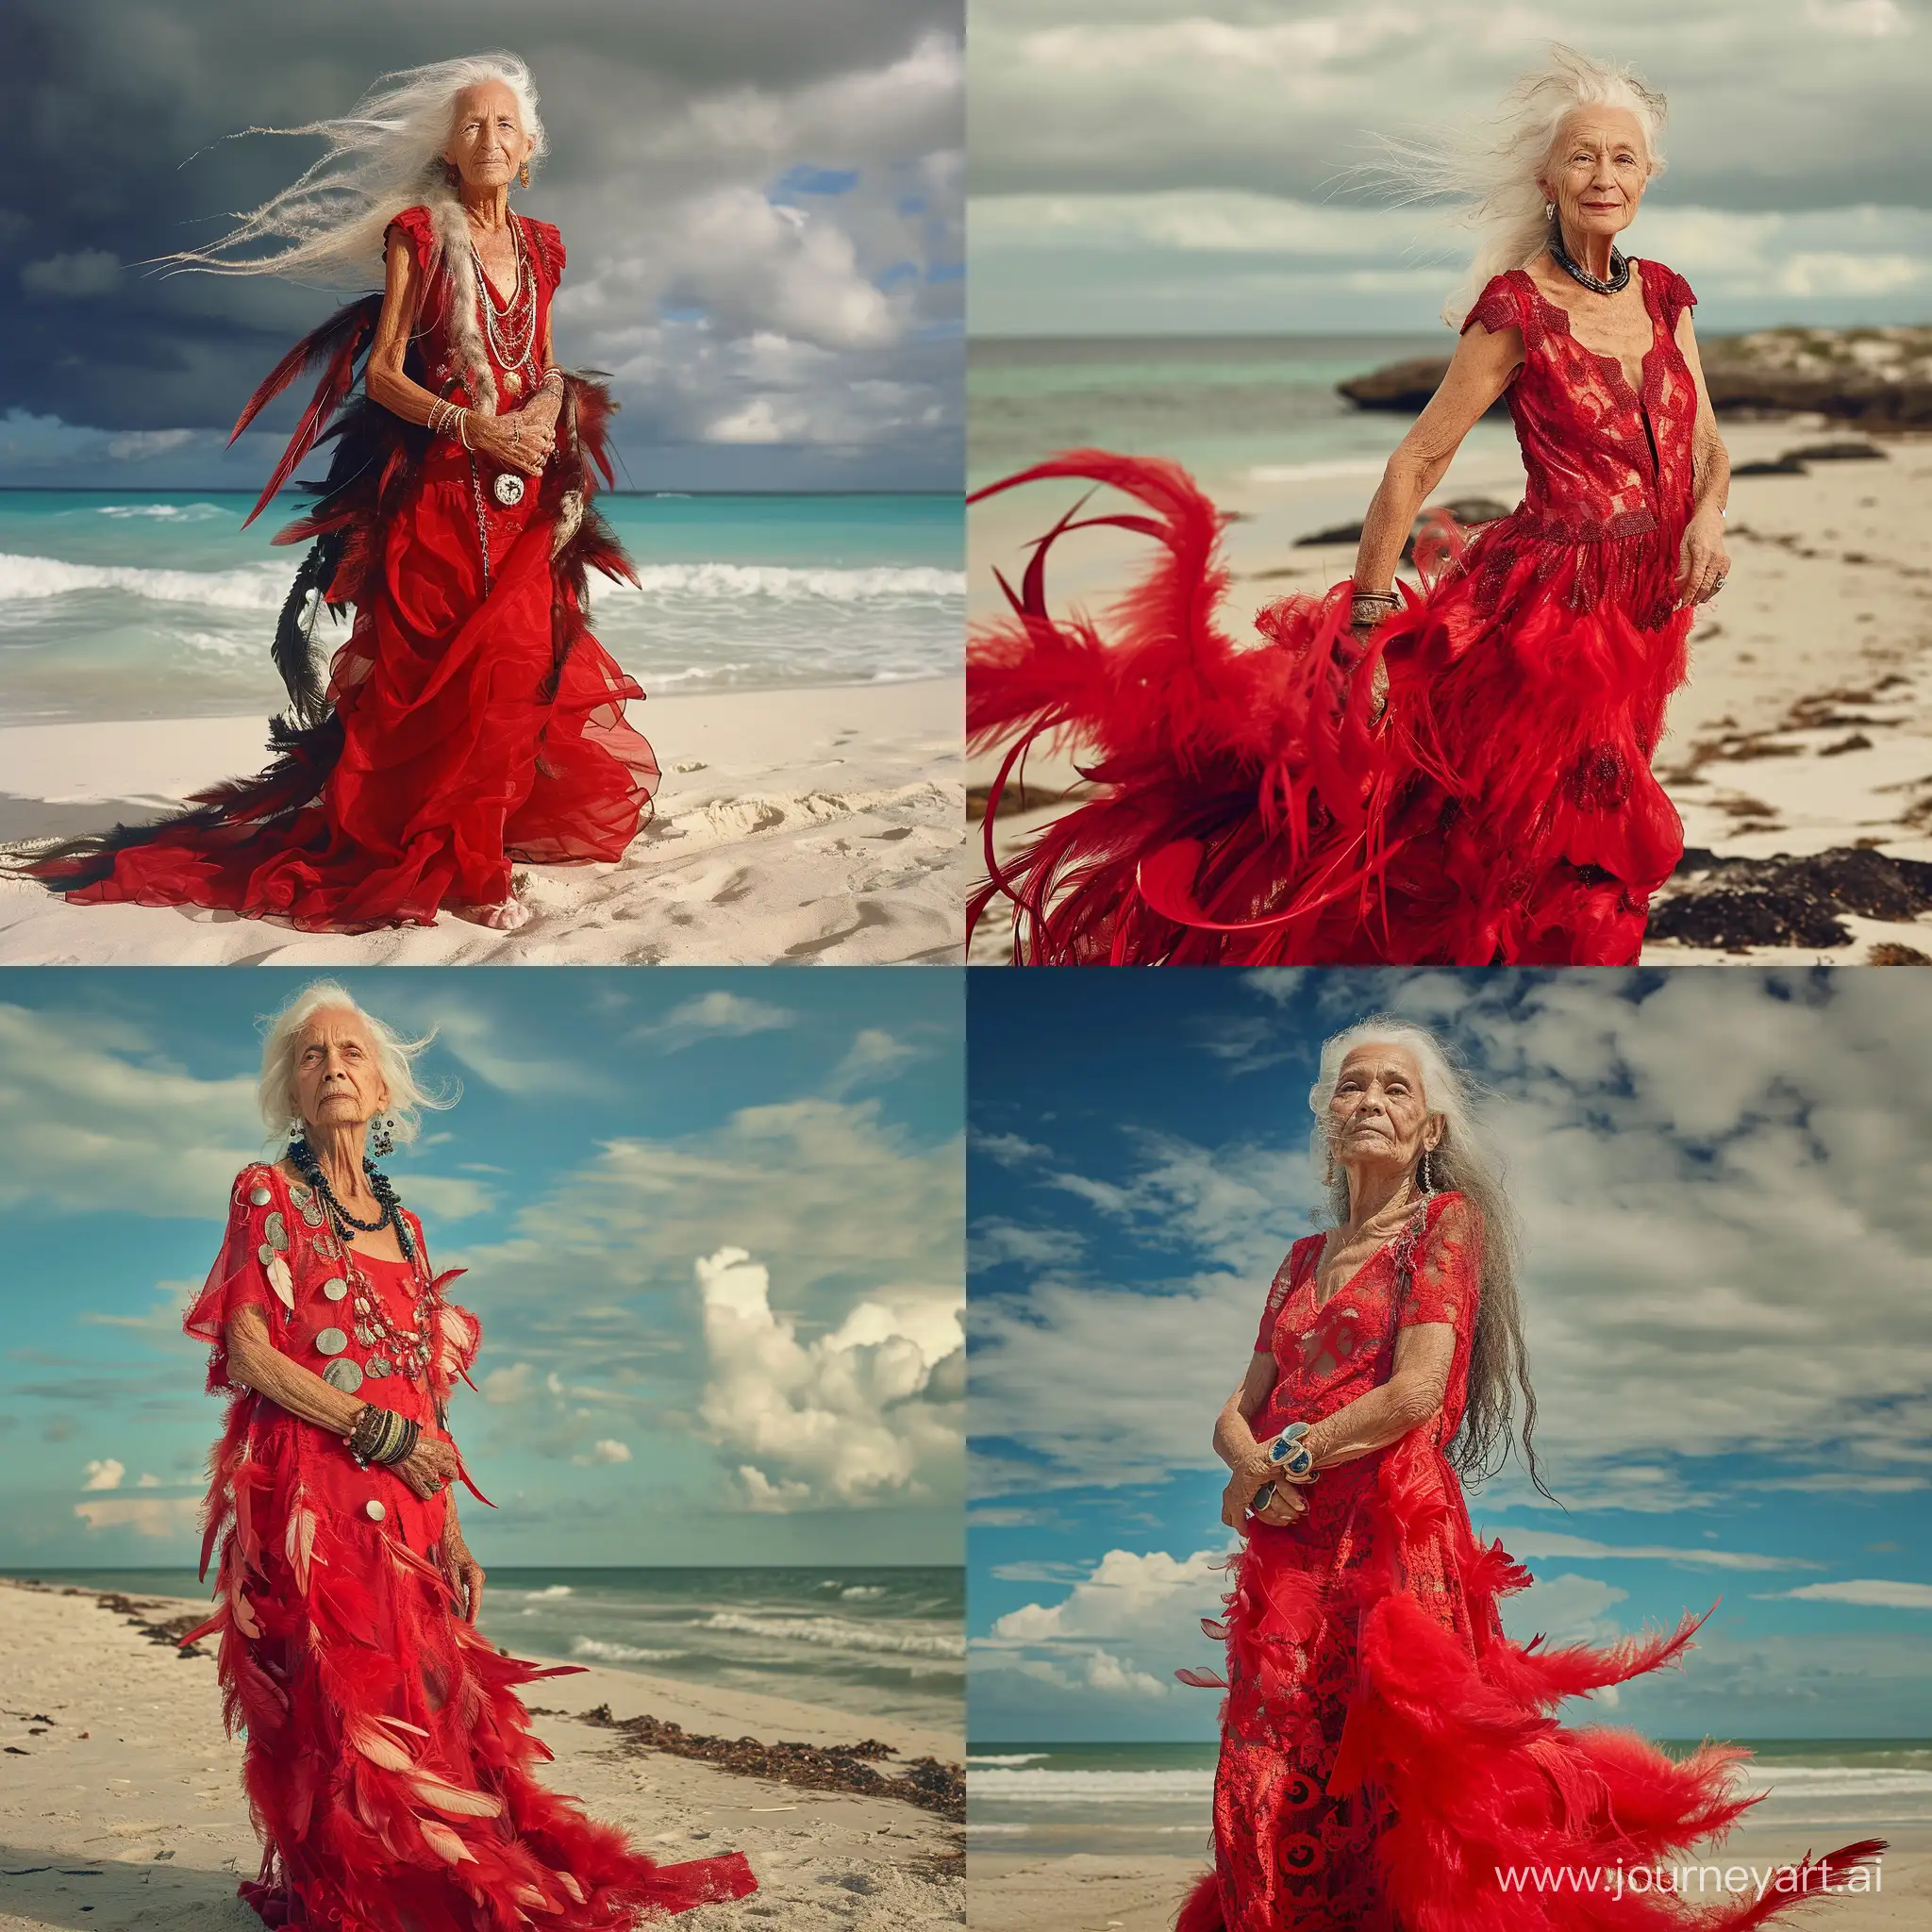 Bohemian-Woman-in-Red-Dress-with-Feathers-by-the-Seaside